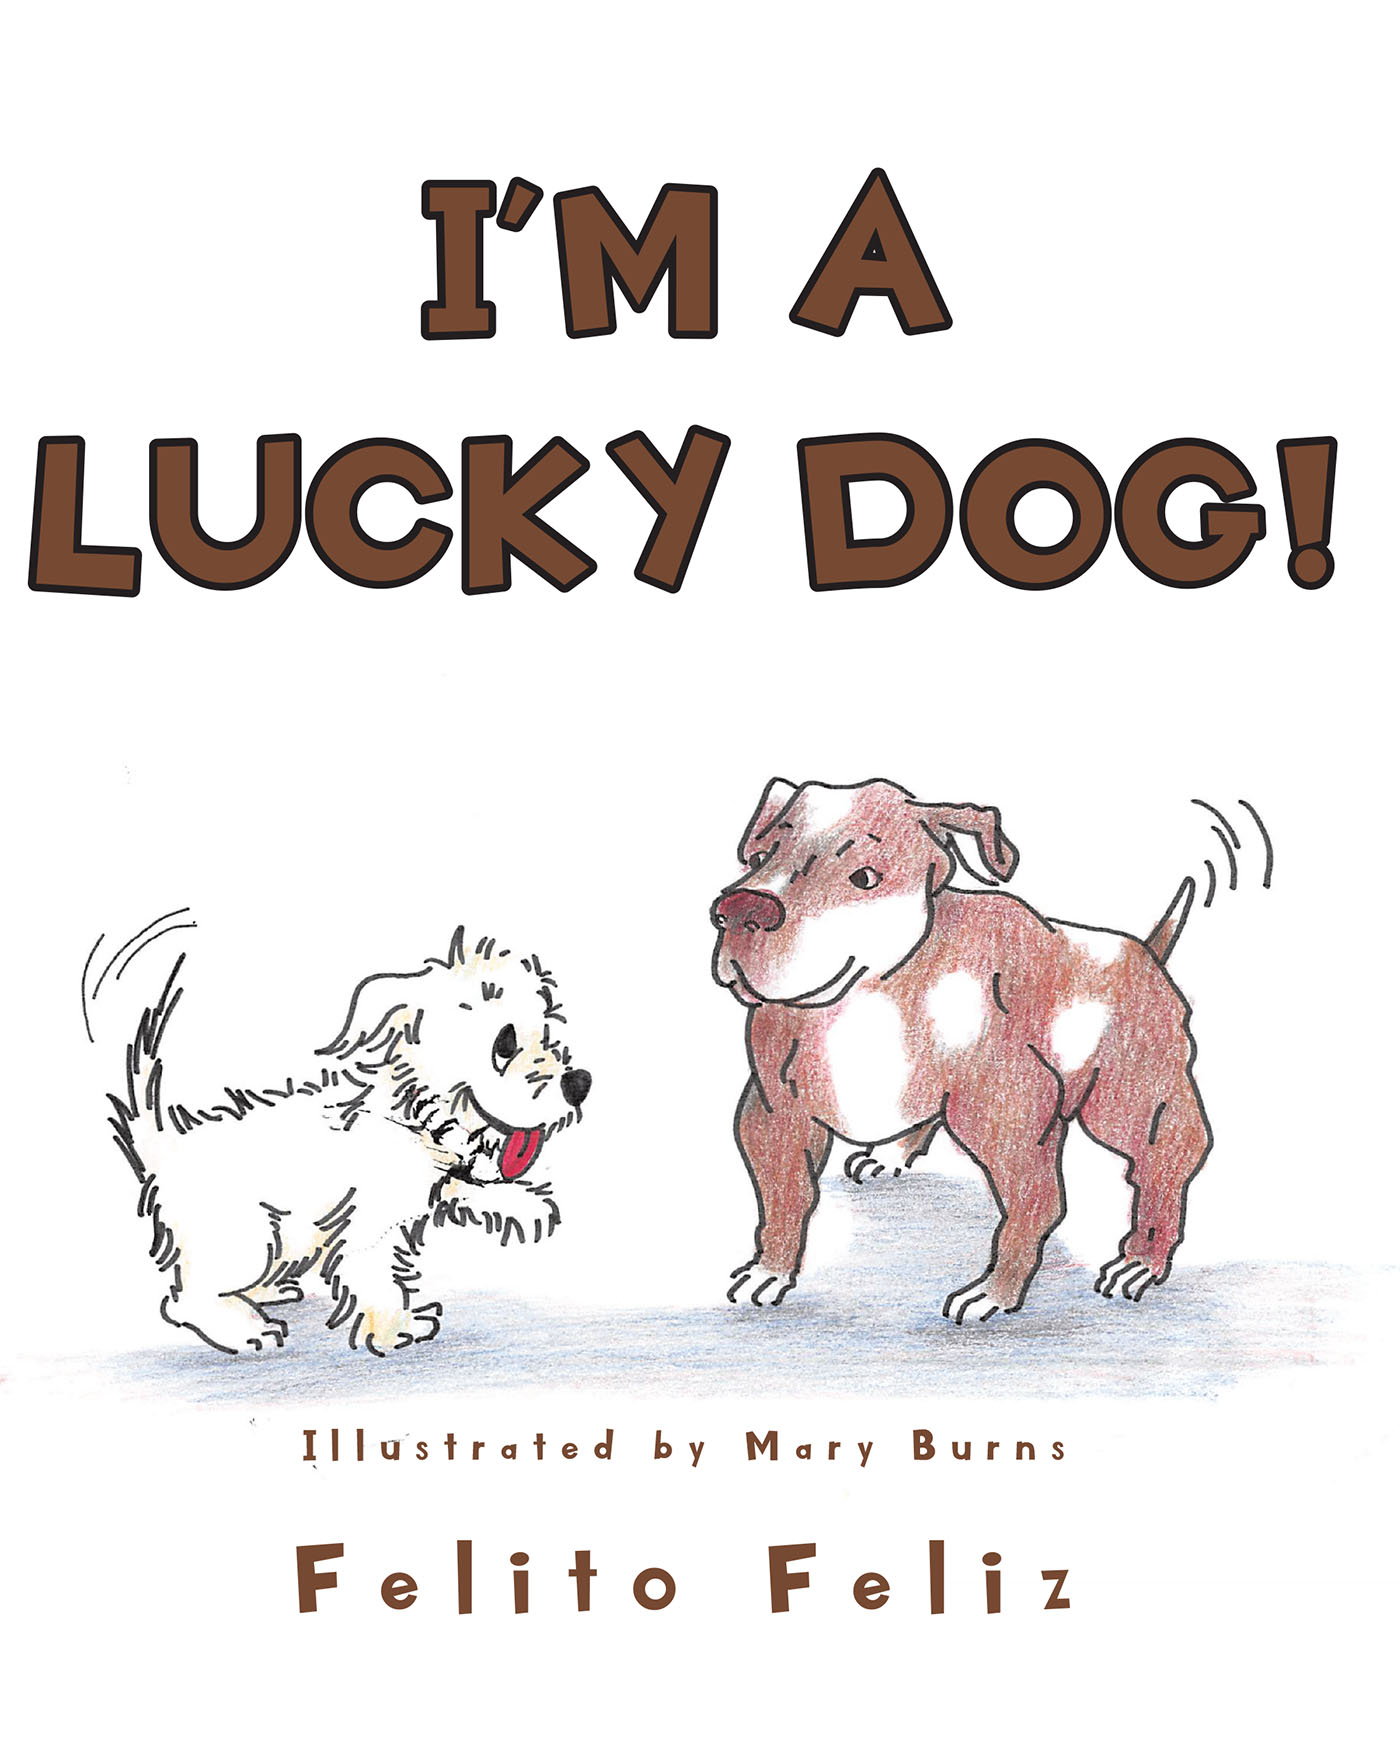 Felito Feliz’s Newly Released “I’M A LUCKY DOG!” is an Educational Story of the Ins and Outs of Caring for a Dog and Animal Rescue